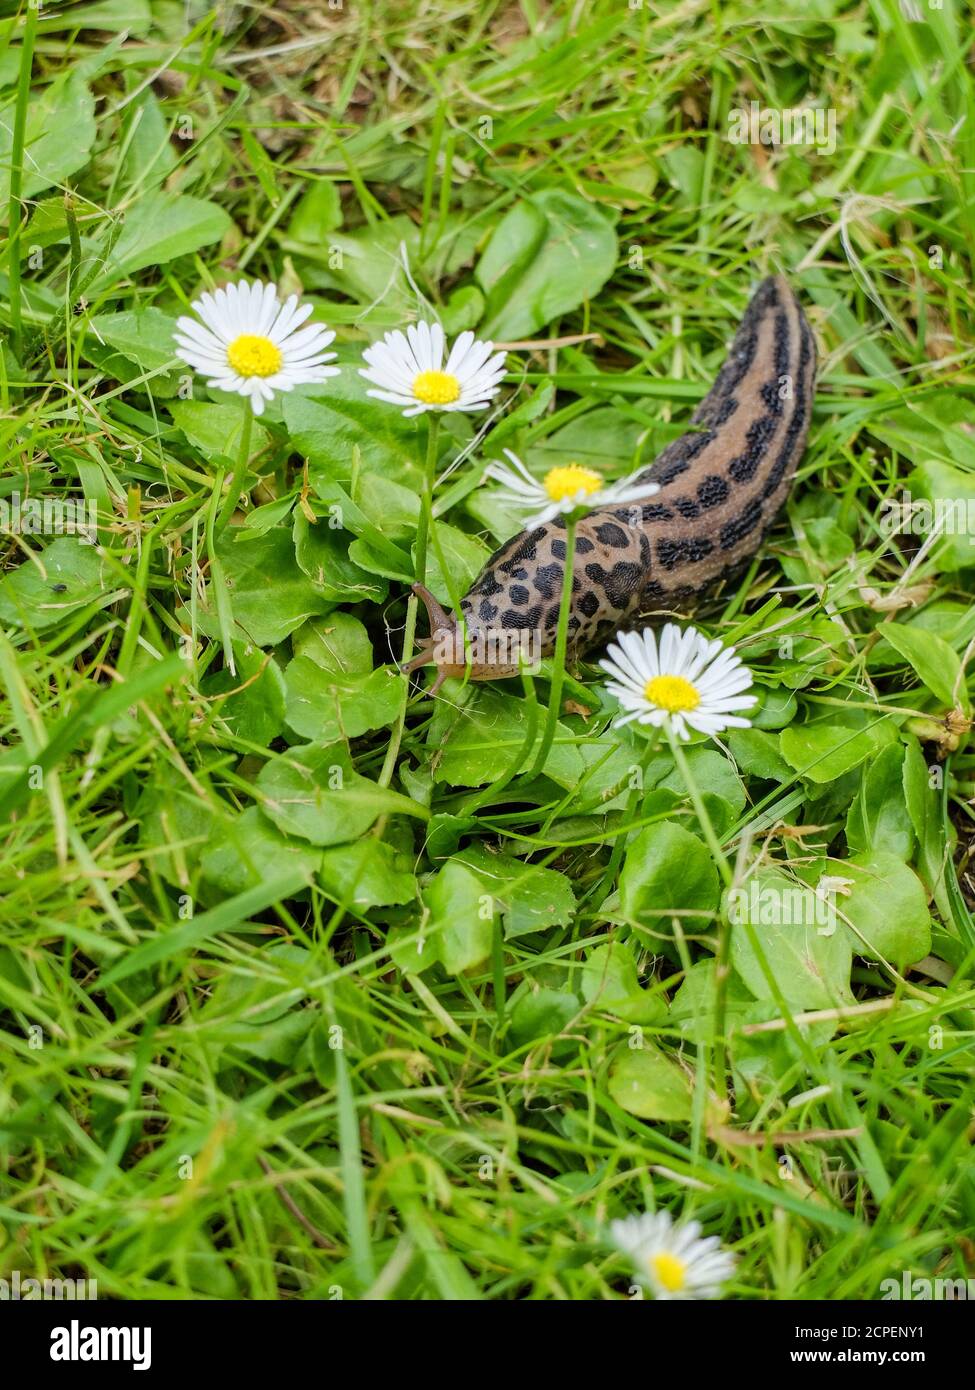 Tiger snail snails (Limax maximus) in the grass between daisies Stock Photo